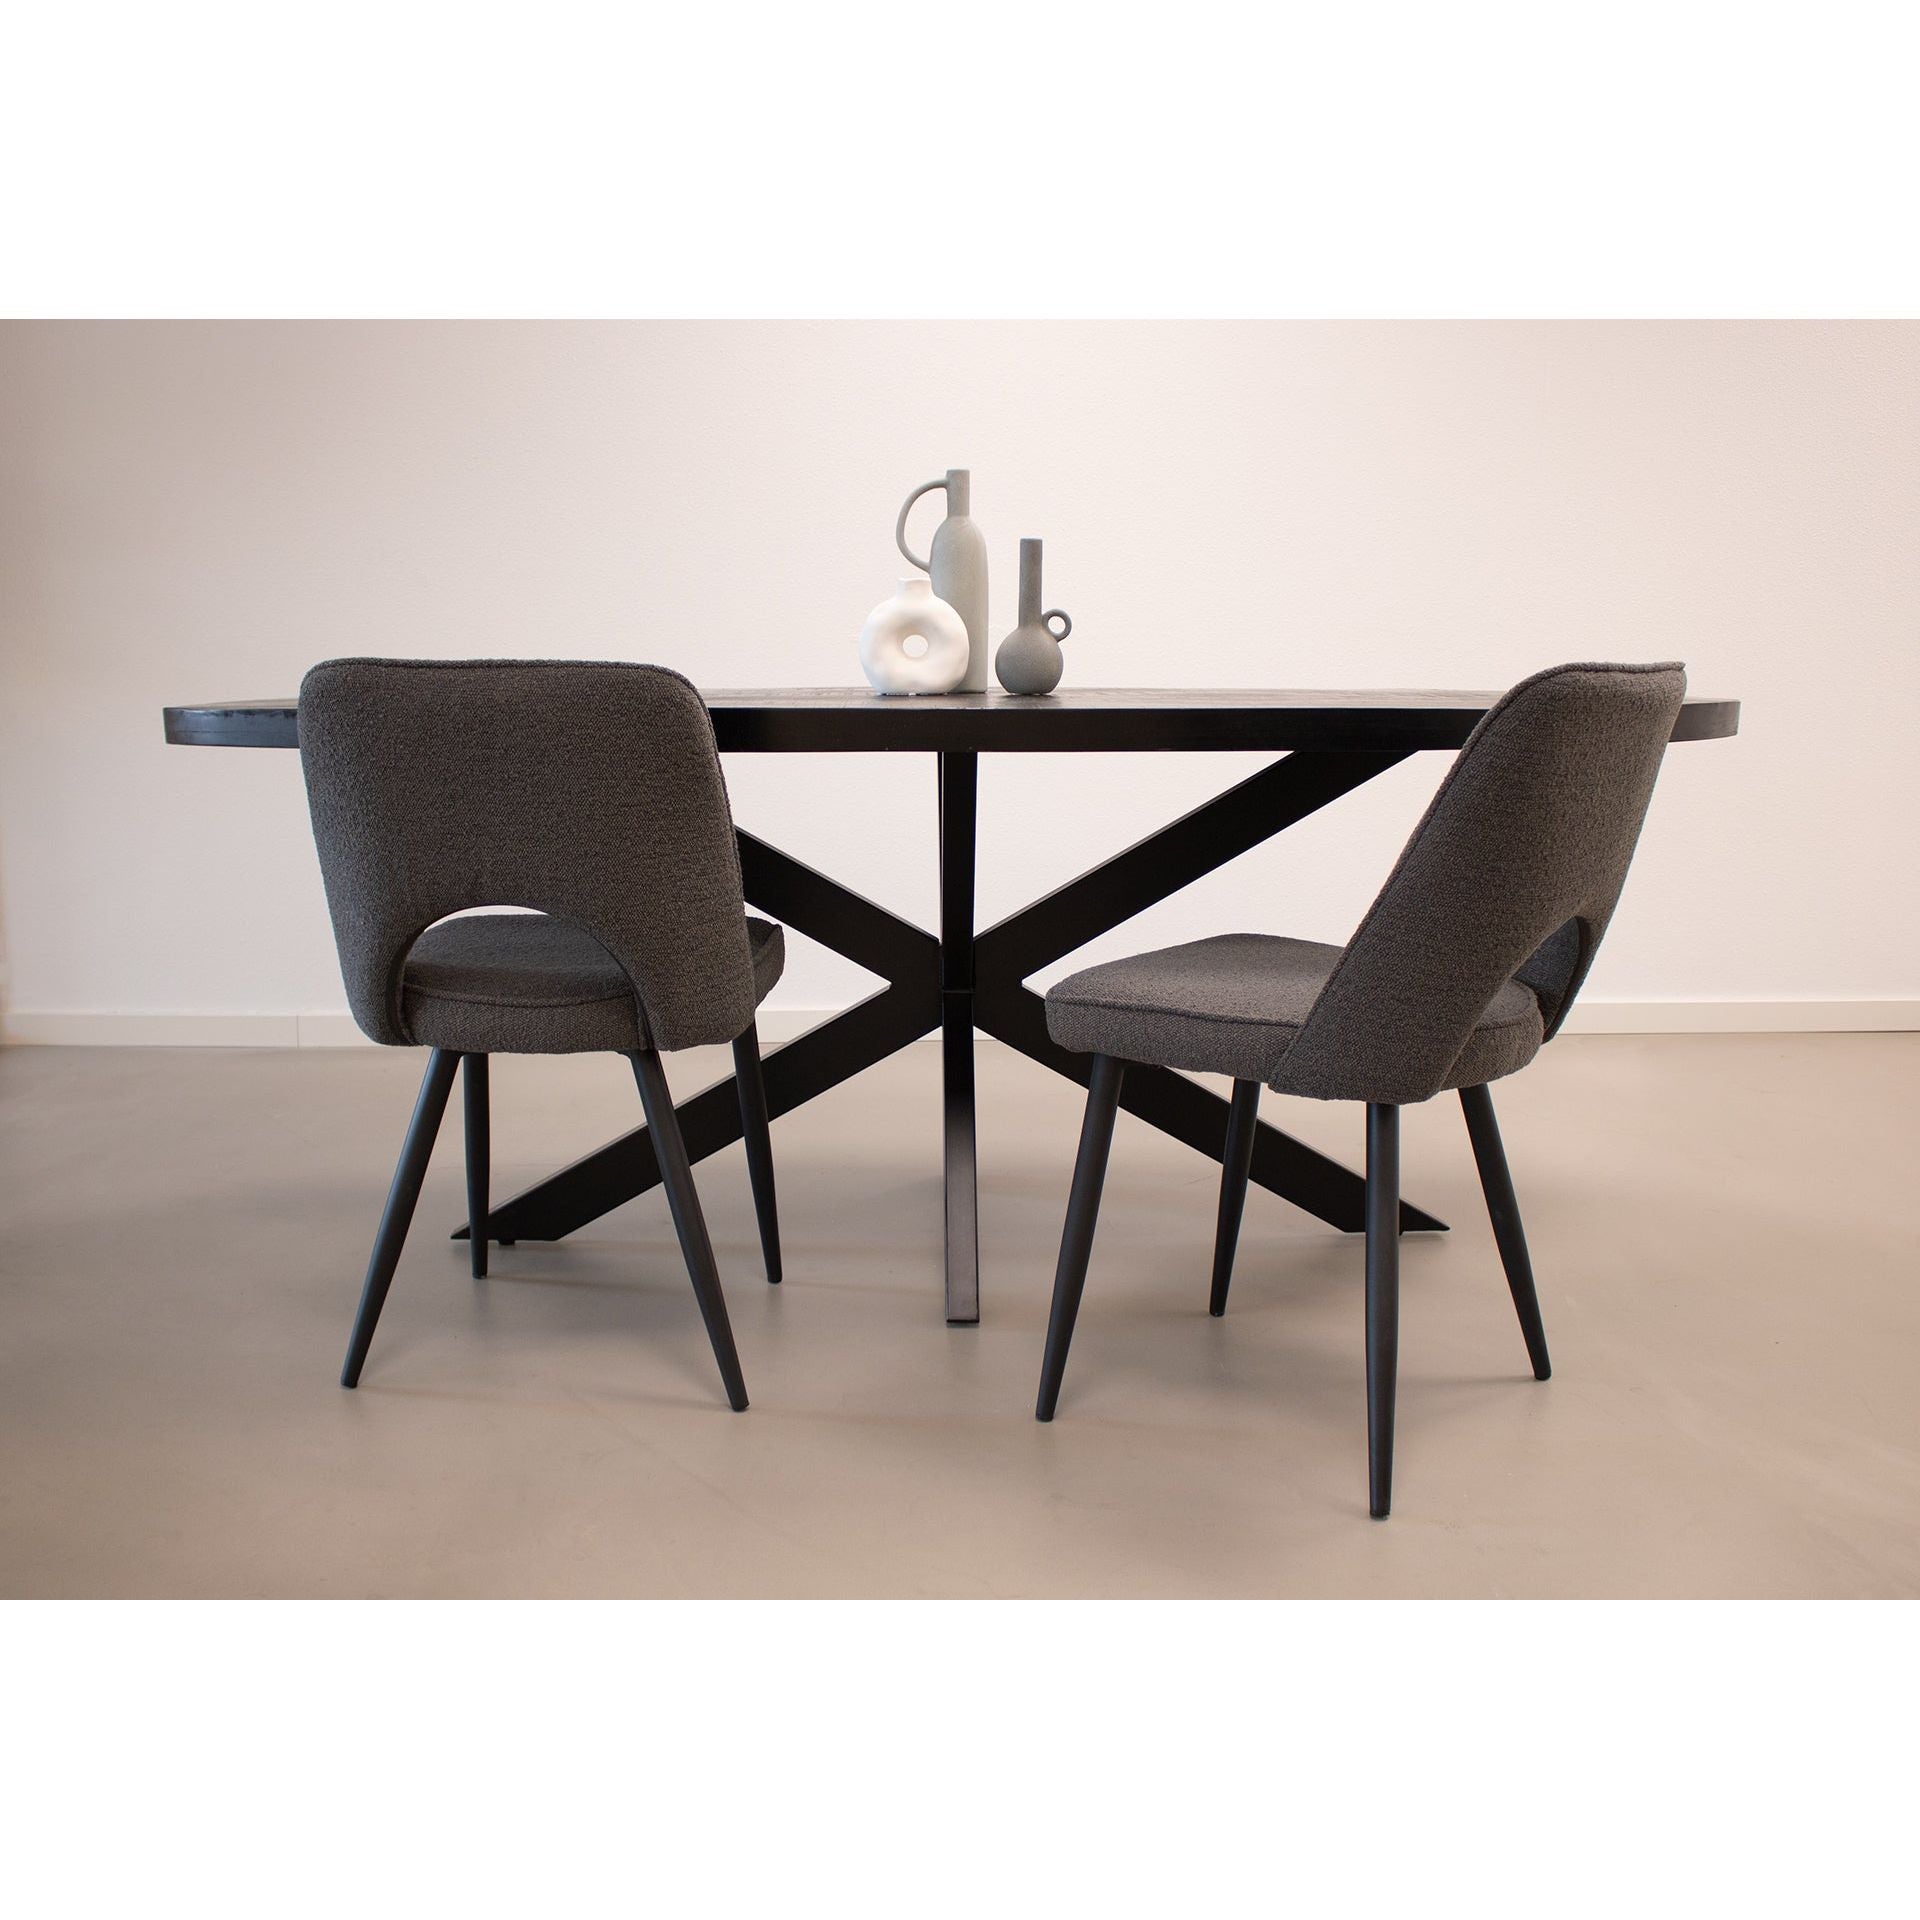 Kick dining room chair Mare